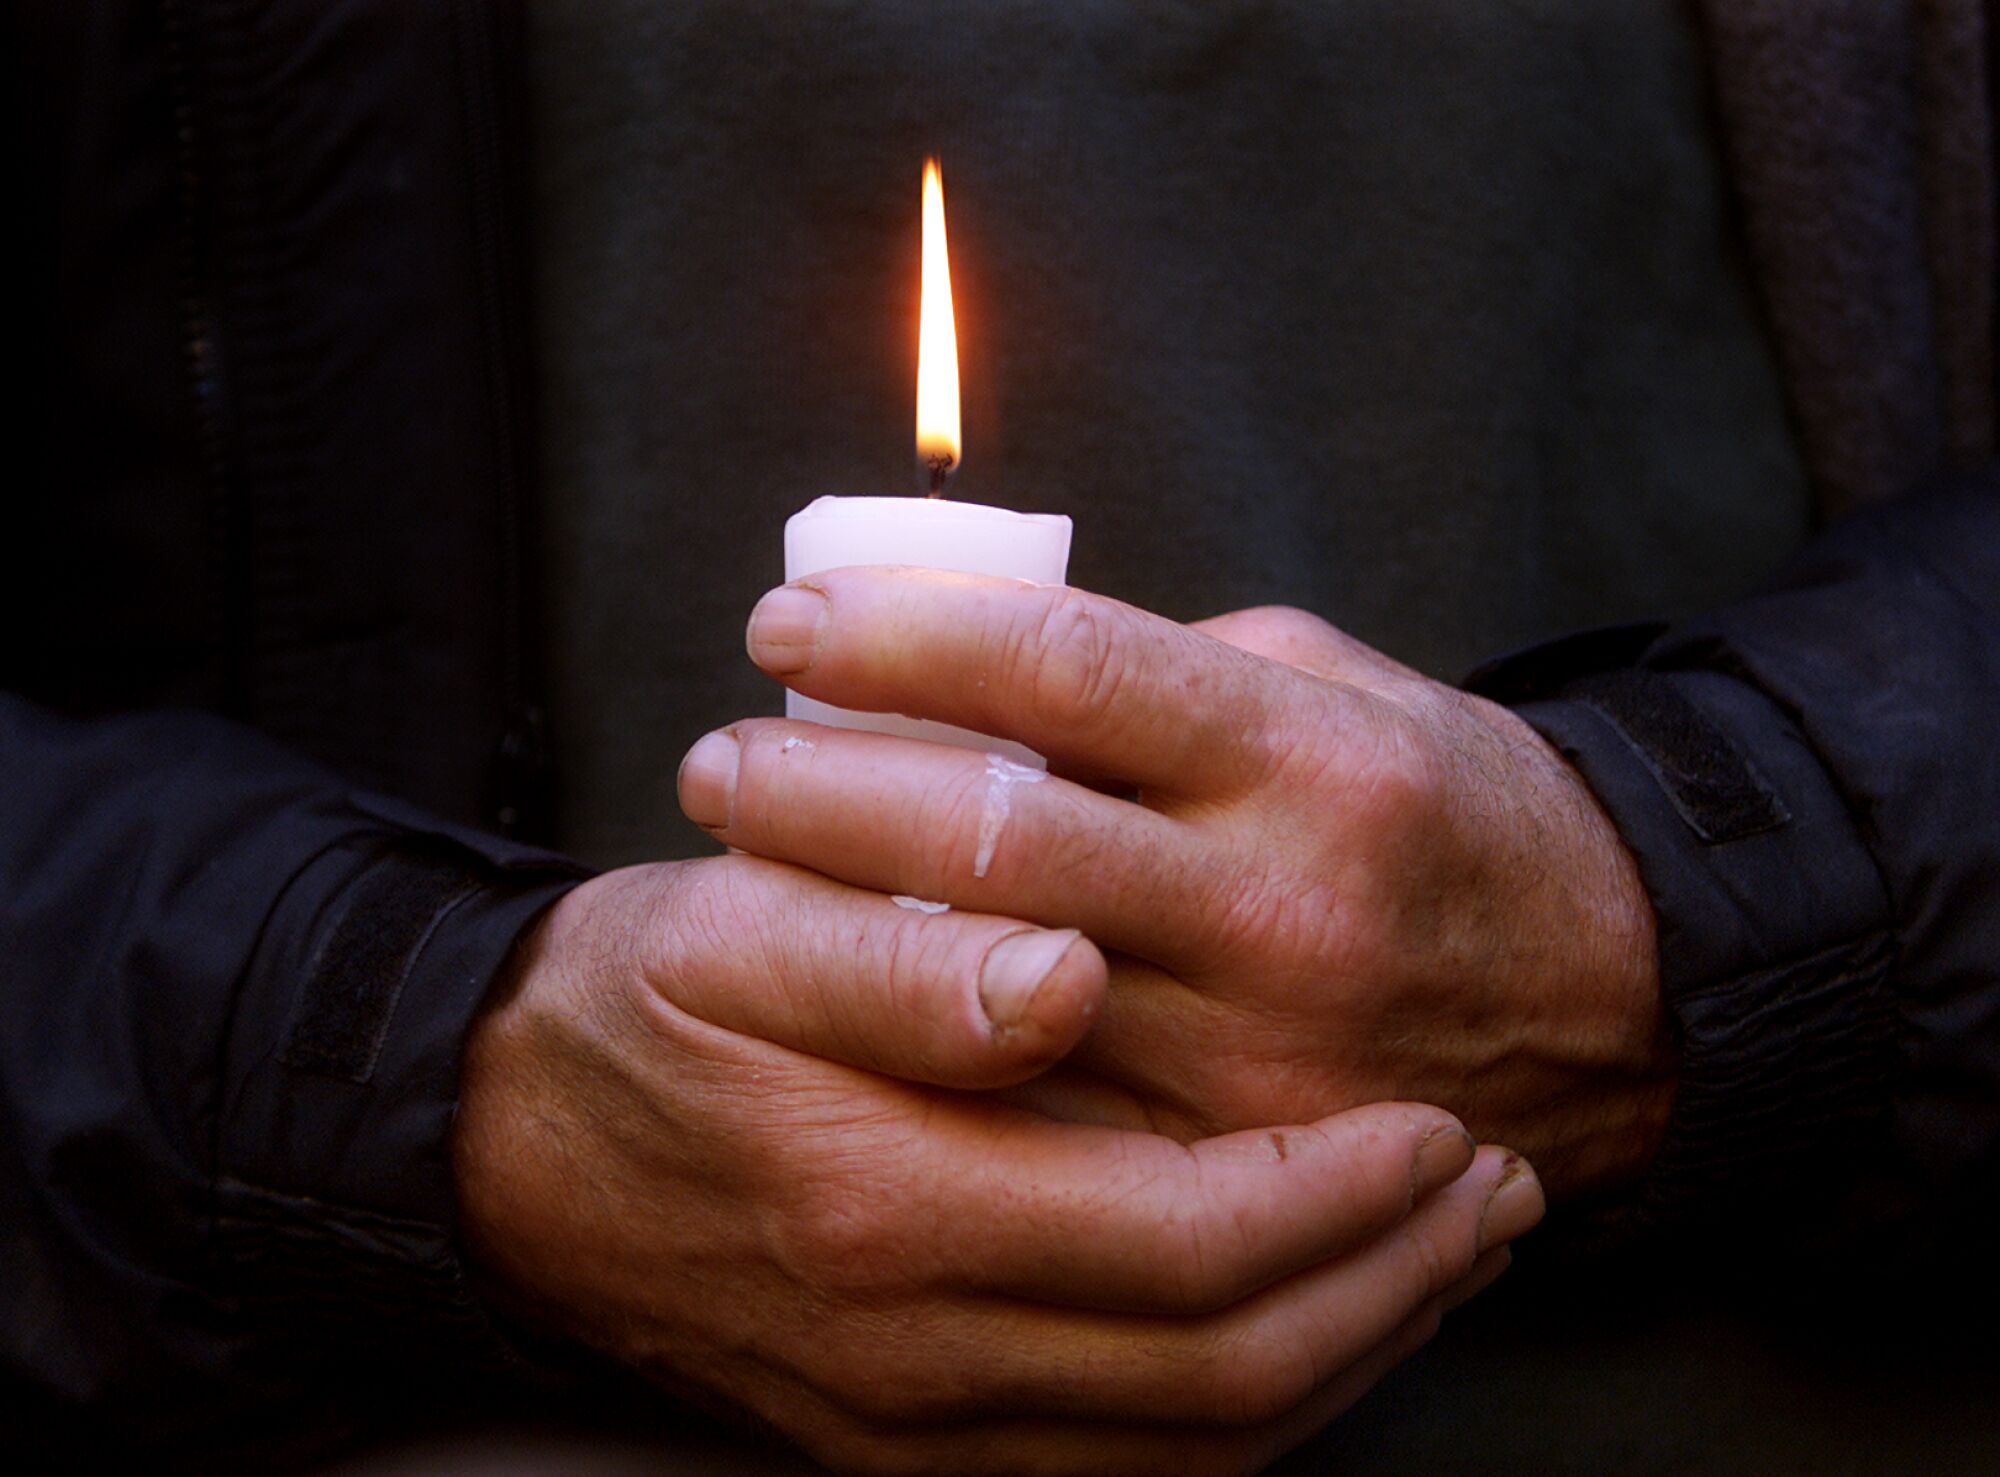 A pair of hands hold a lit candle